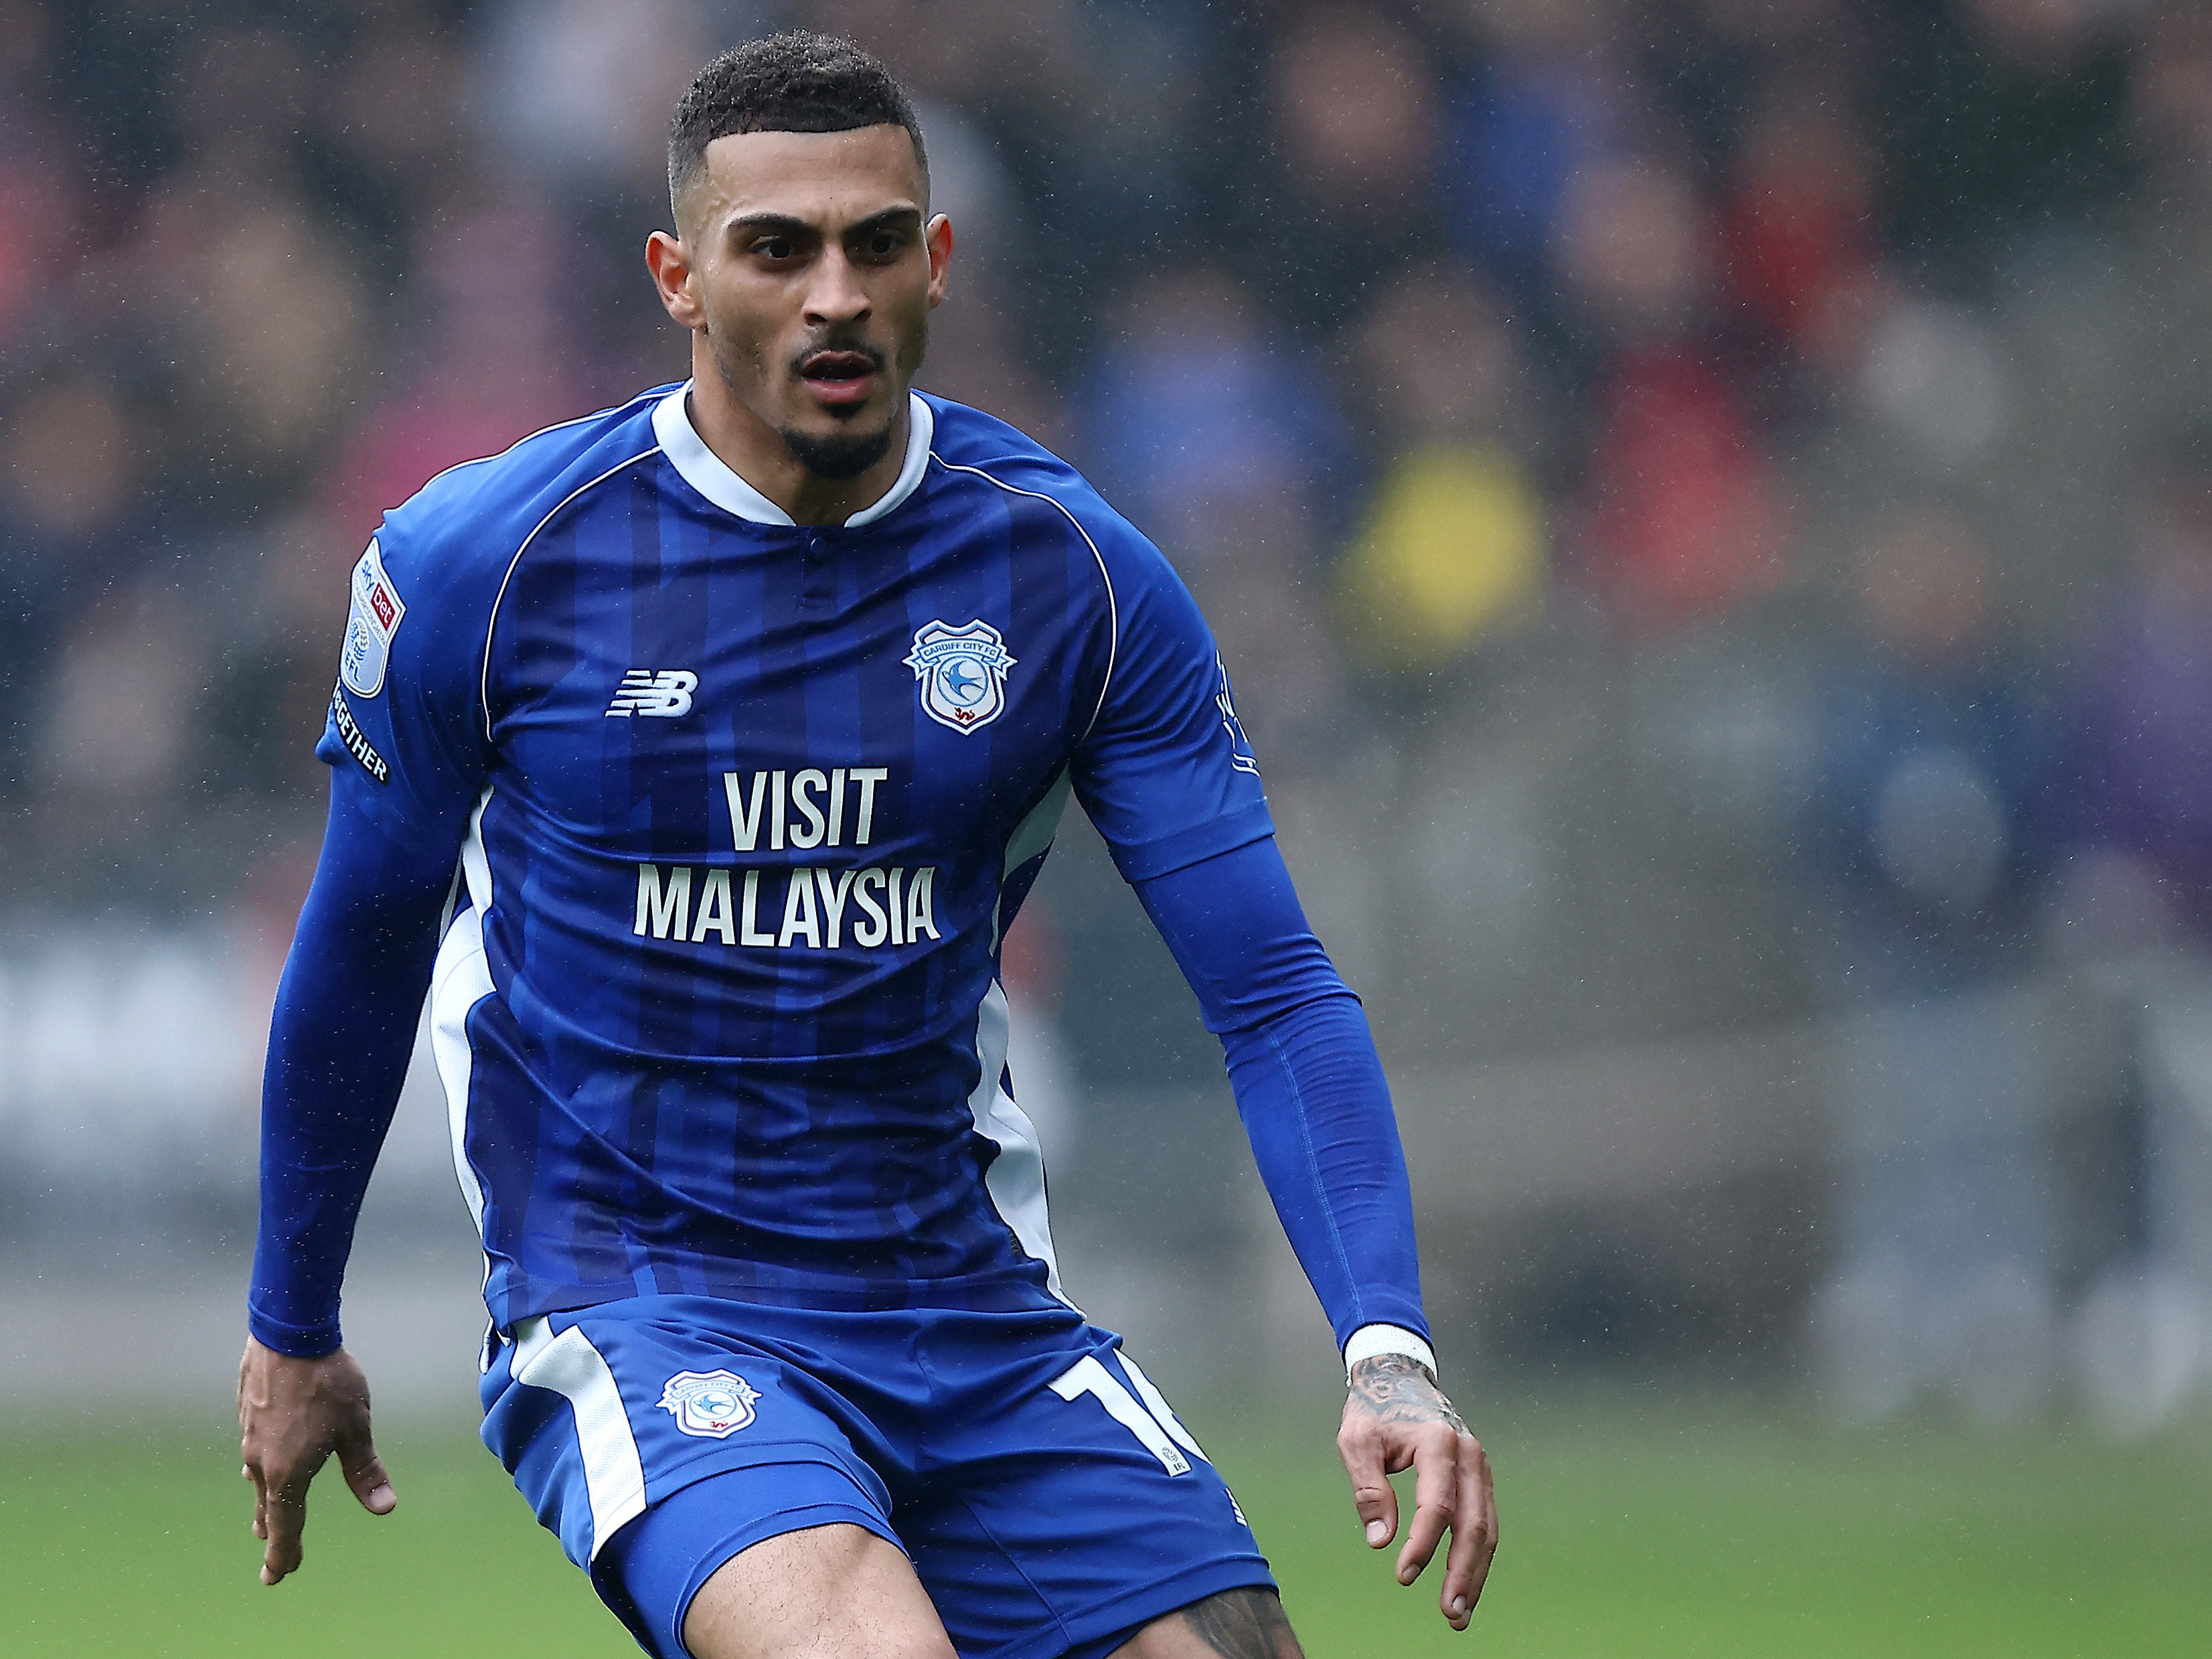 A photo of Albion forward Karlan Grant in action for loan club Cardiff in their home blue kit